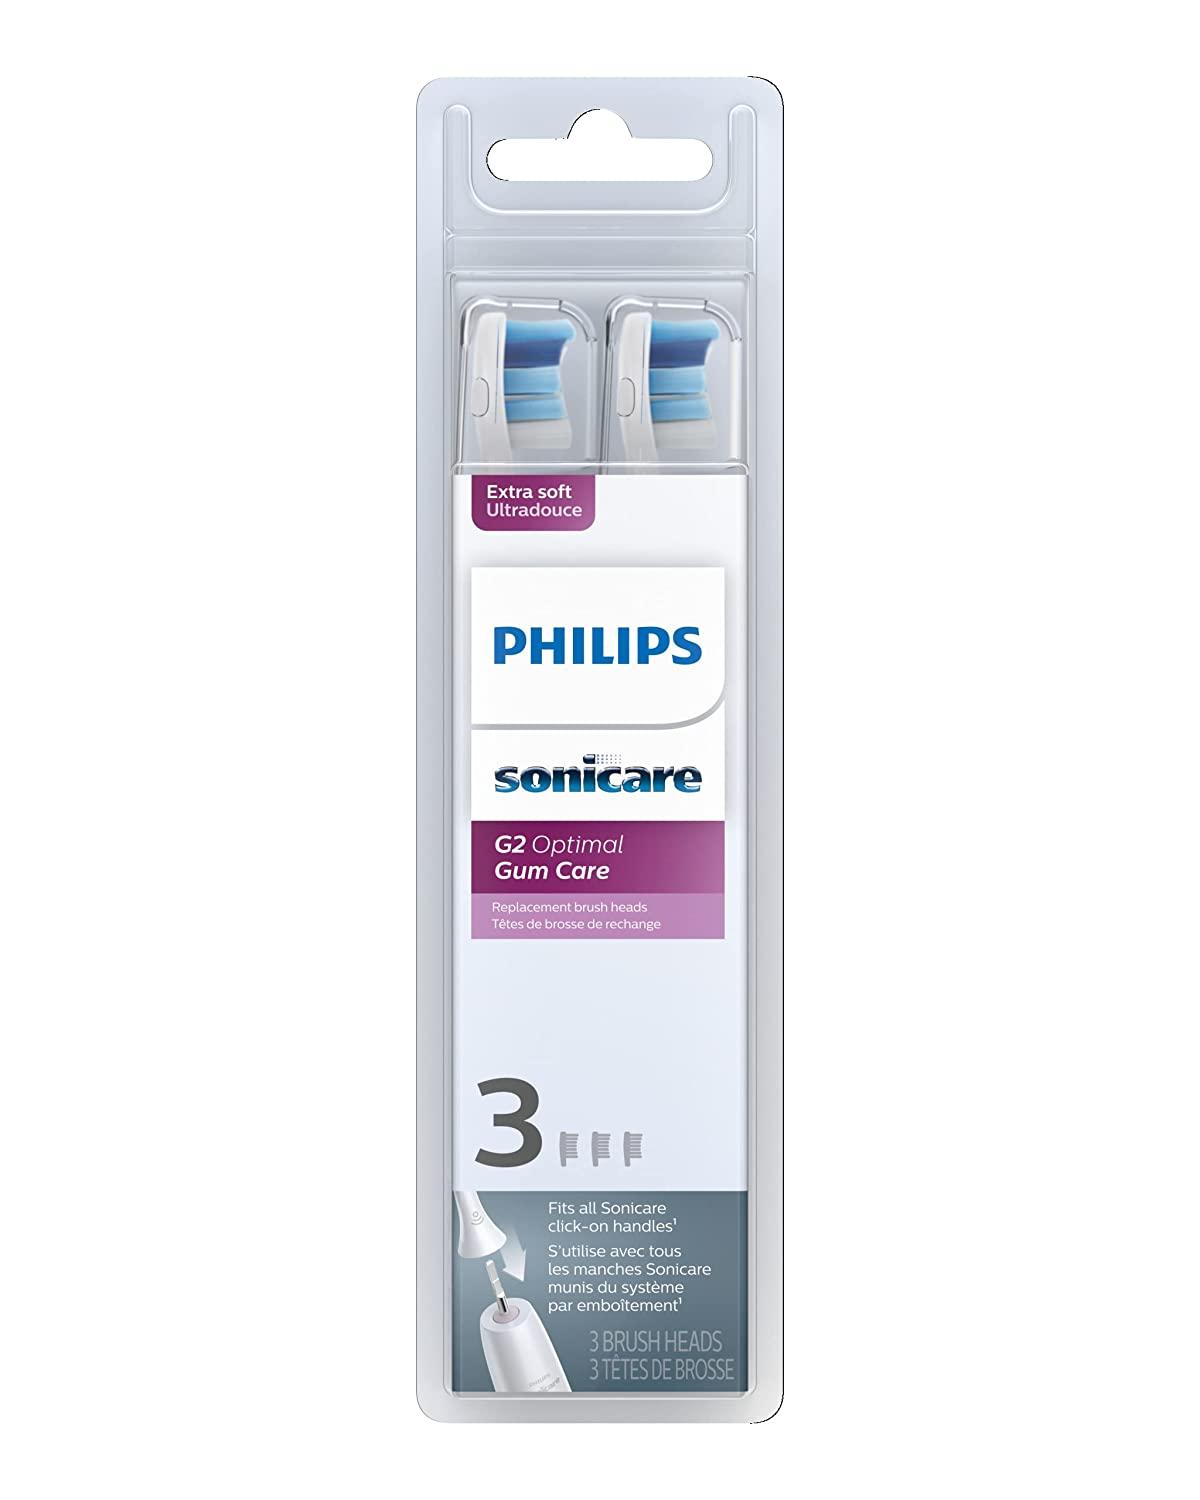 Applied gauge Applicable Philips Sonicare Genuine G2 Optimal Gum Care Replacement Toothbrush Heads,  3 Brush Heads, White, HX9033/65